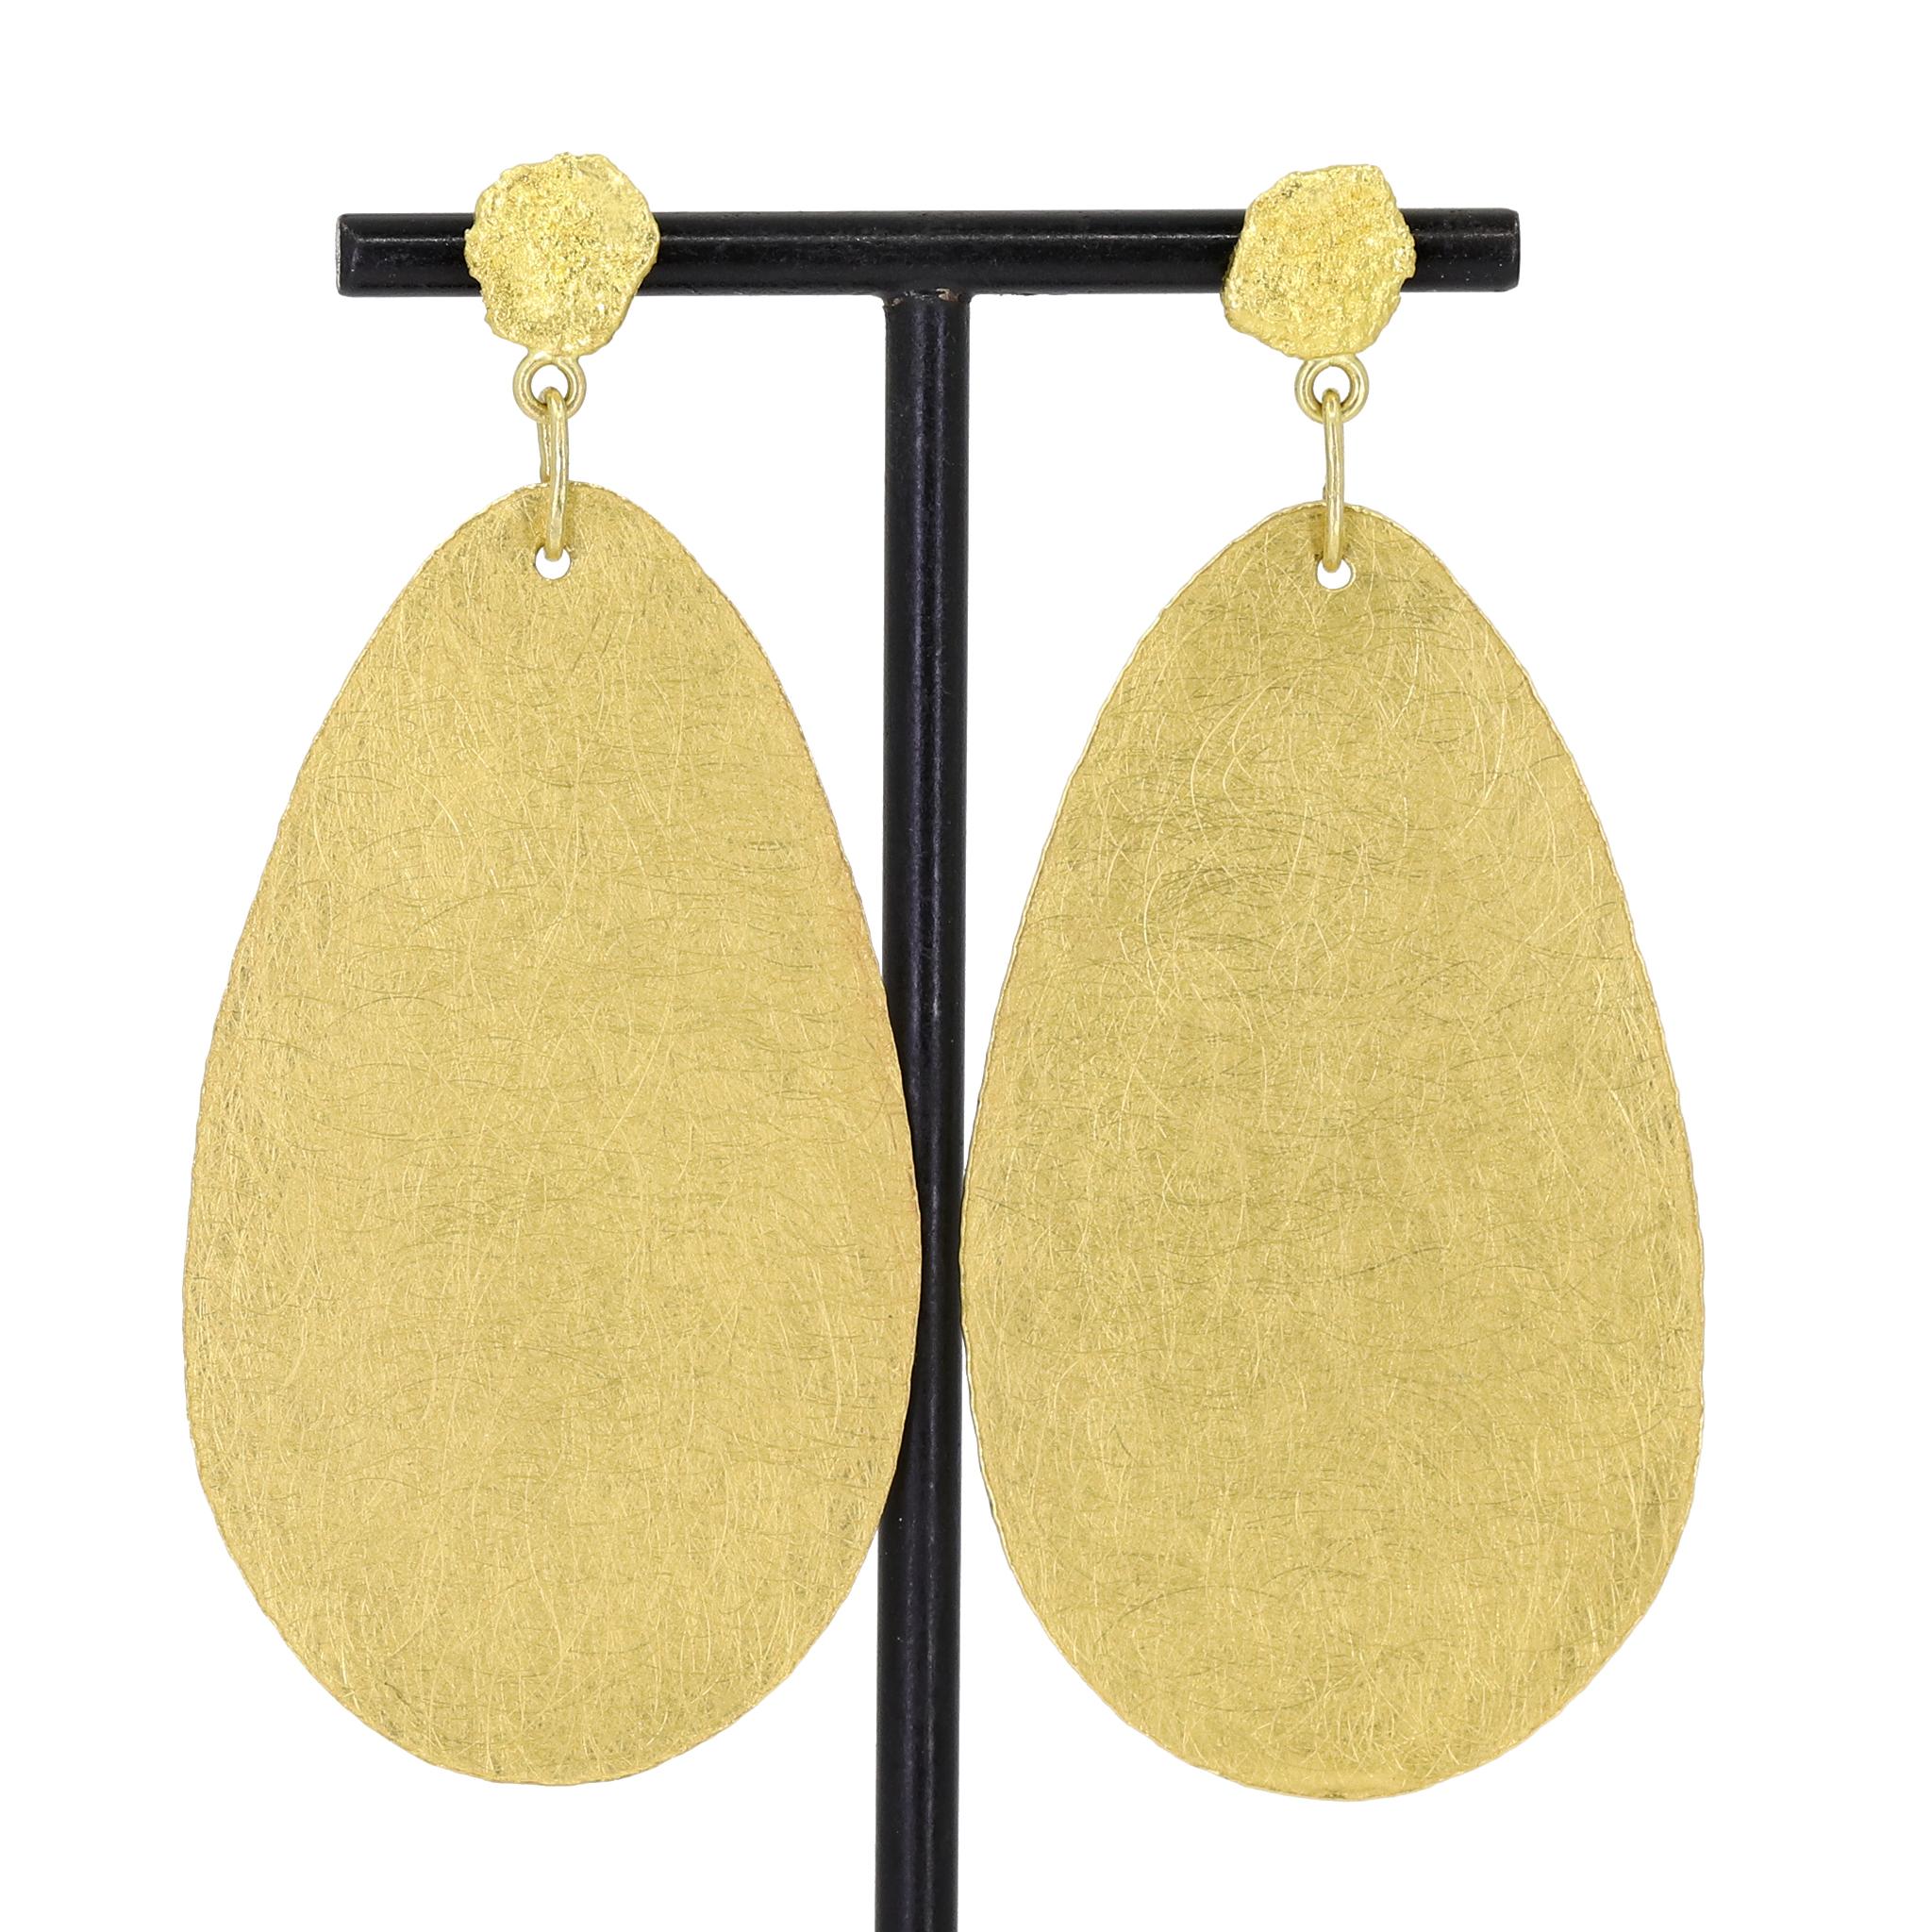 Elongated Oval Sheet XL Dangle Drop Earrings hand-fabricated by acclaimed jewelry maker Petra Class featuring intricately-finished extra large elongated oval 22k yellow gold sheets dangling from free-form 22k yellow gold studs finished with the